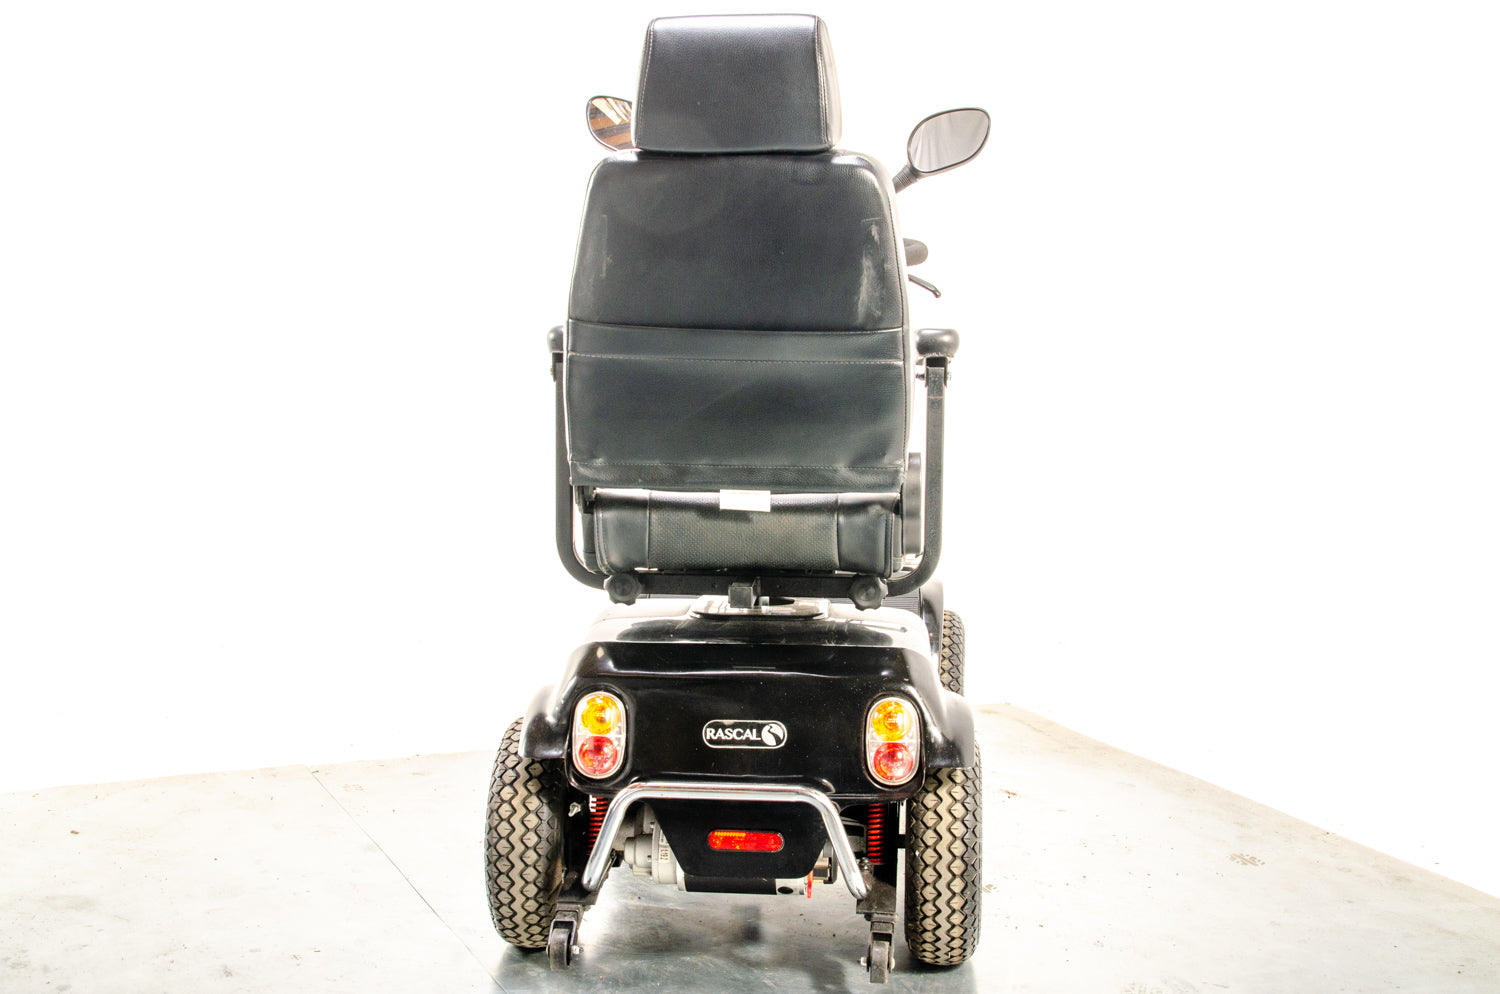 Rascal Pioneer Used Electric Mobility Scooter 8mph All-Terrain Suspension Off-Road Black 13360